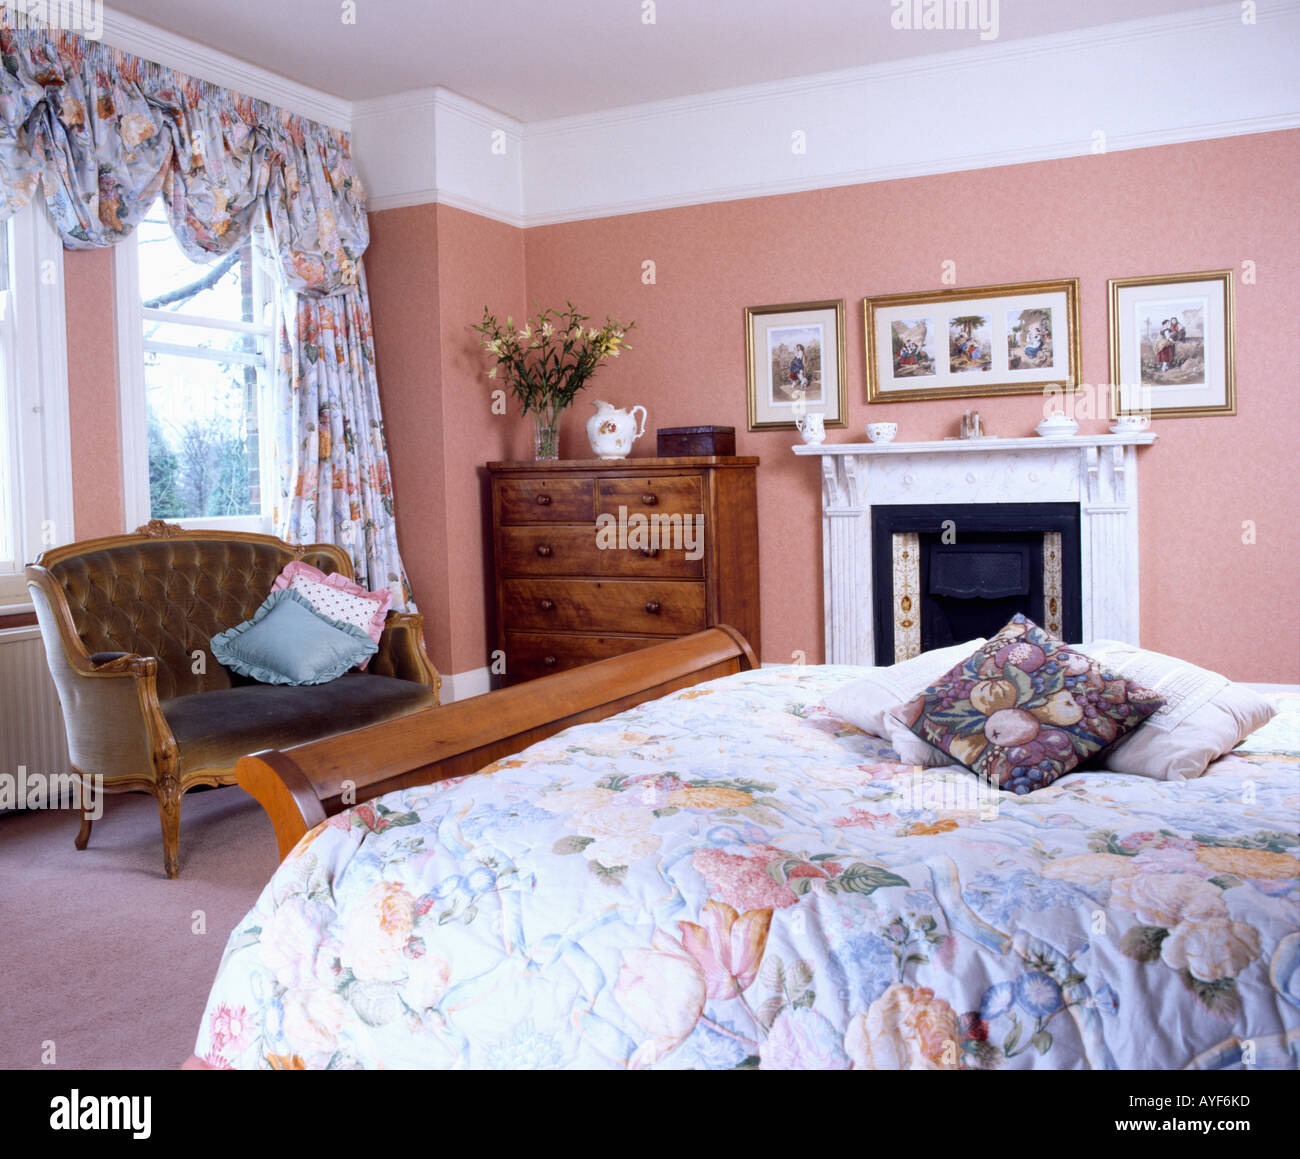 Peach Bedroom With Matching Floral Curtains And Quilt Stock Photo Alamy